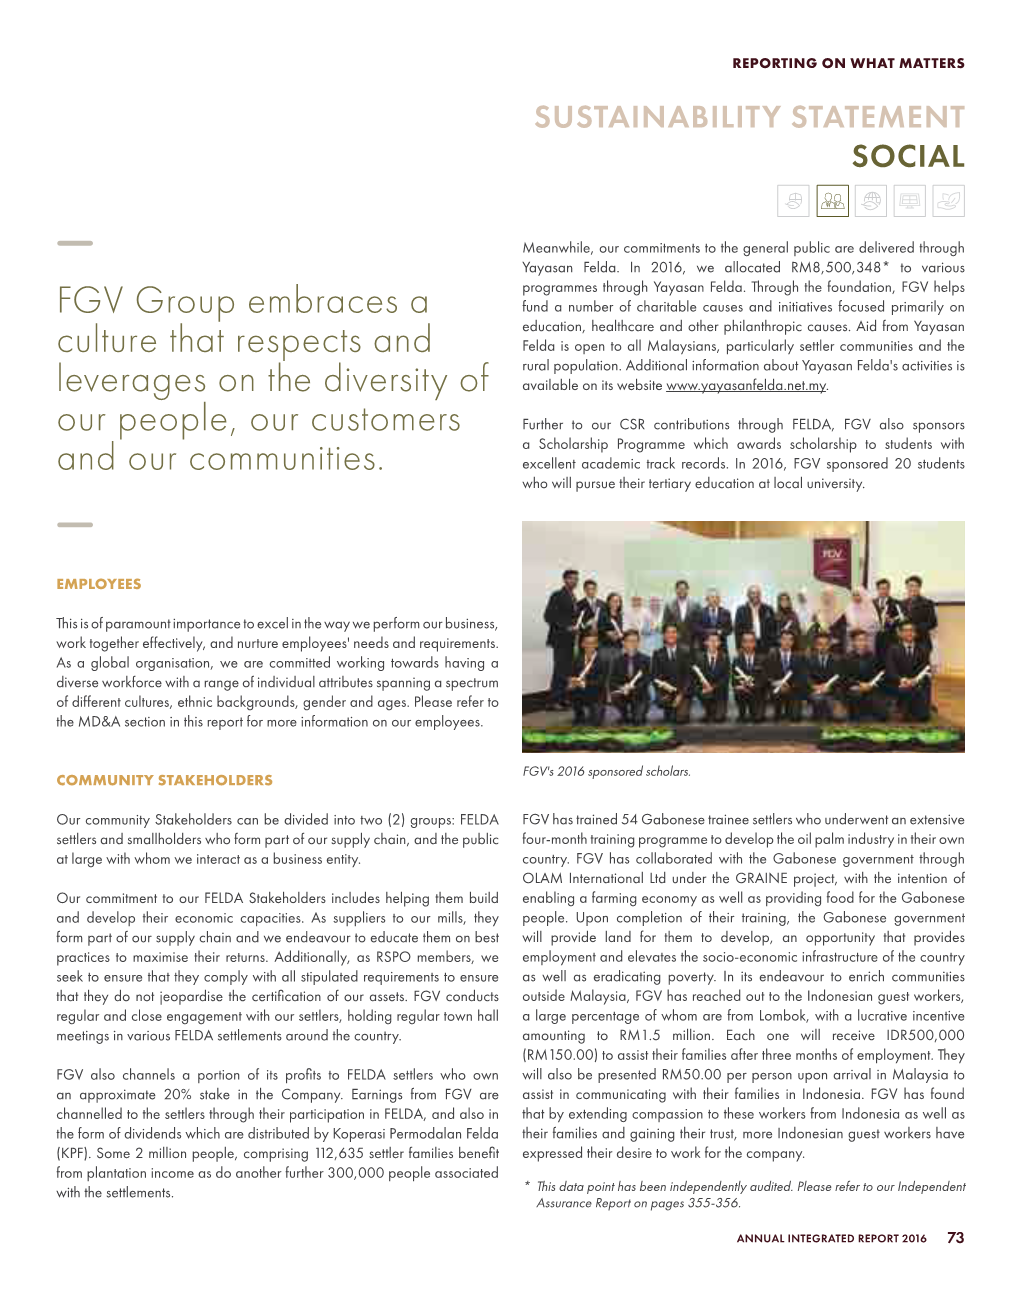 FGV Group Embraces a Culture That Respects and Leverages on The